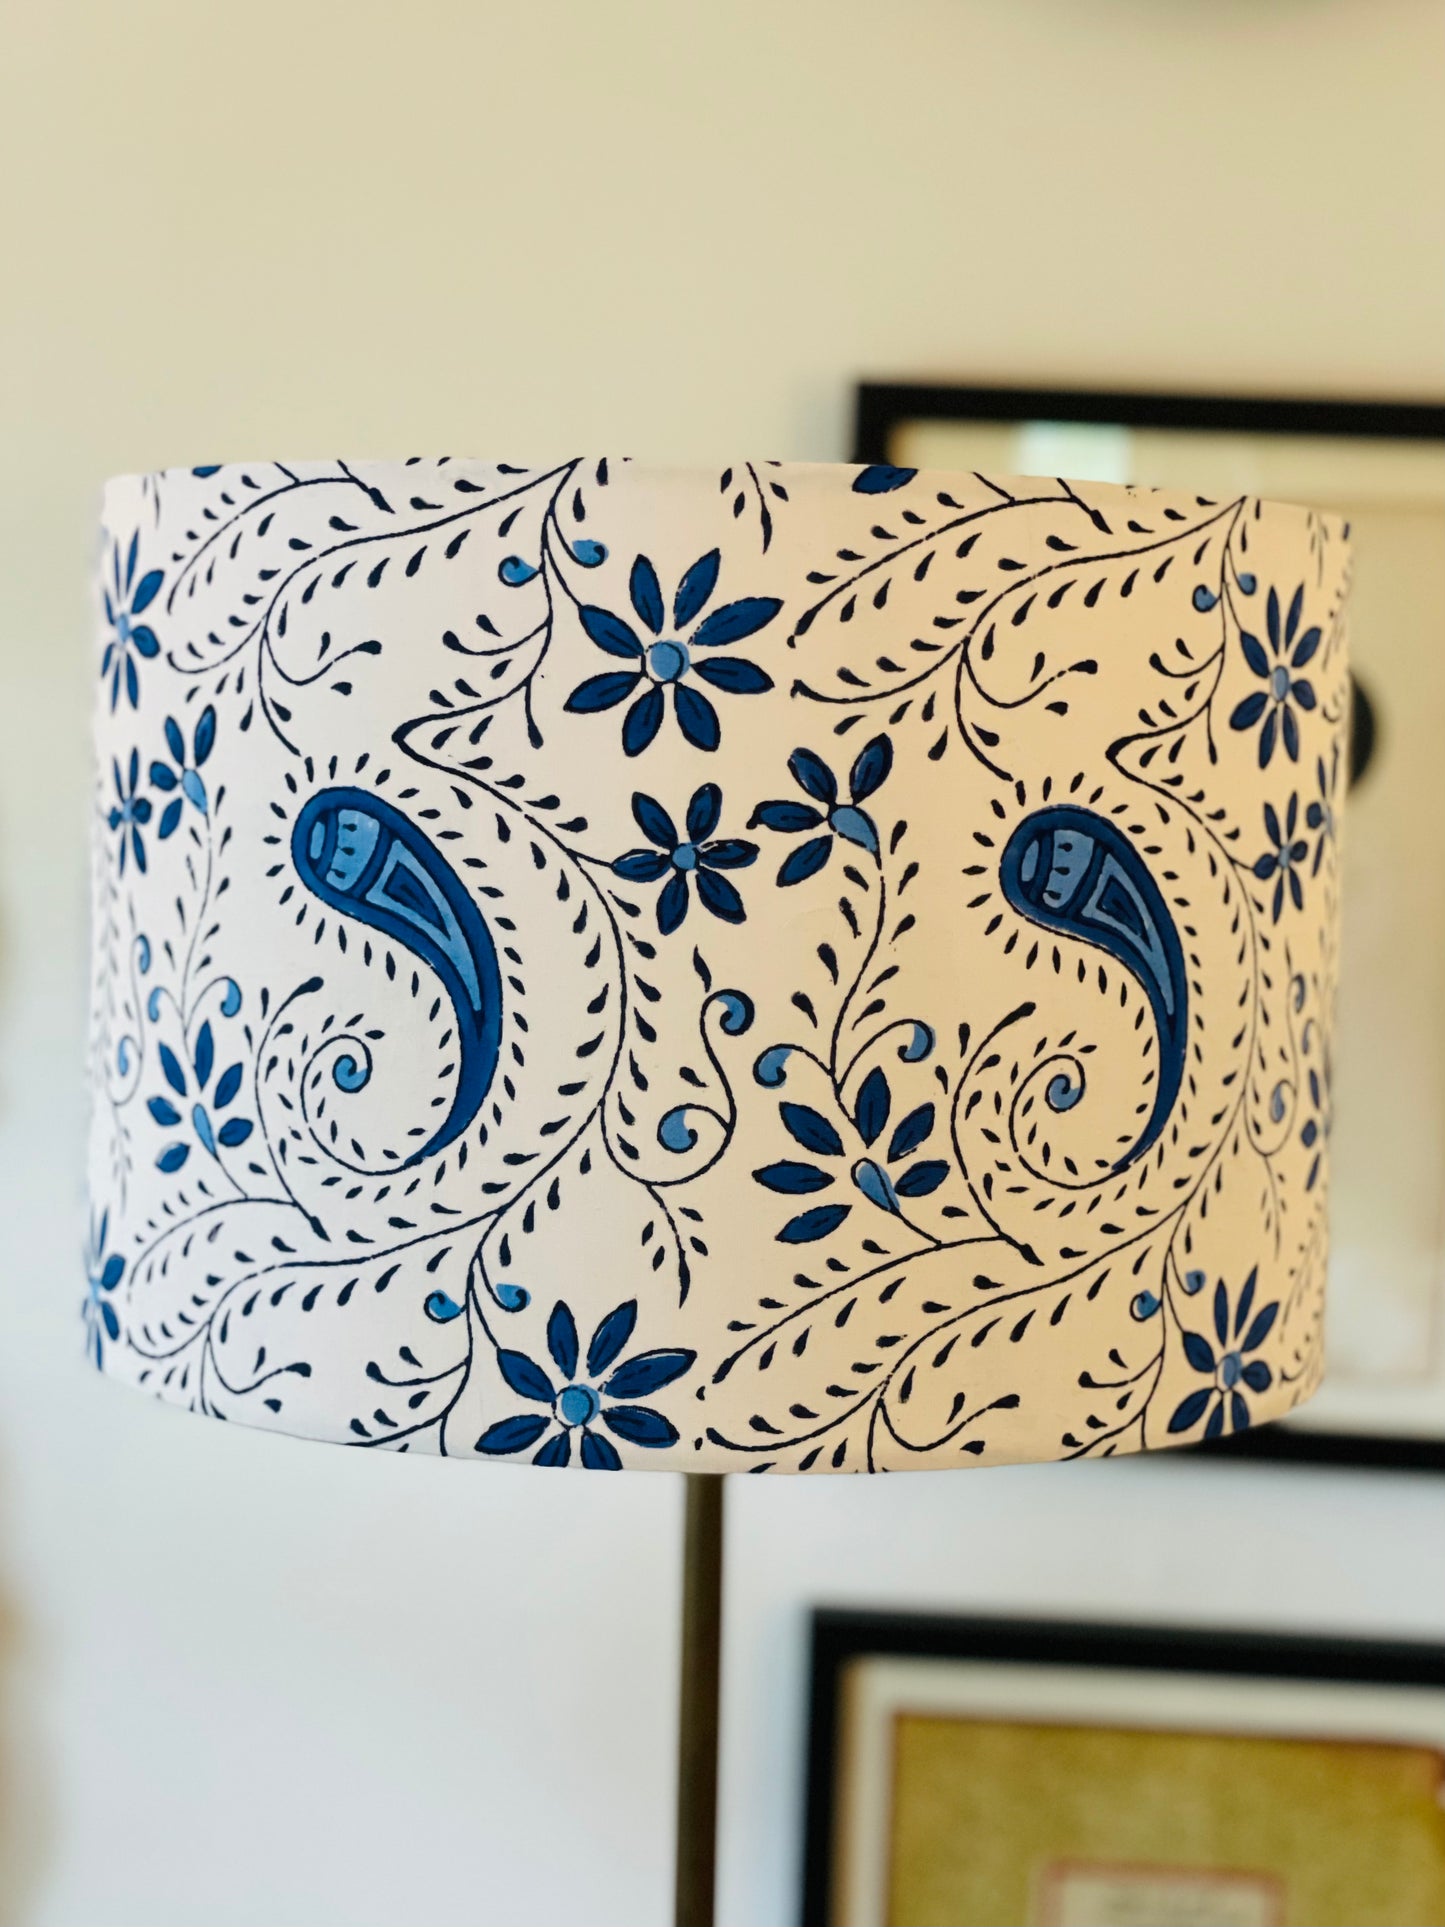 12 Inch Drum Lampshade. Indian Block Print. Playful Floral and Paisley. Oxford Blue and Navy on White.